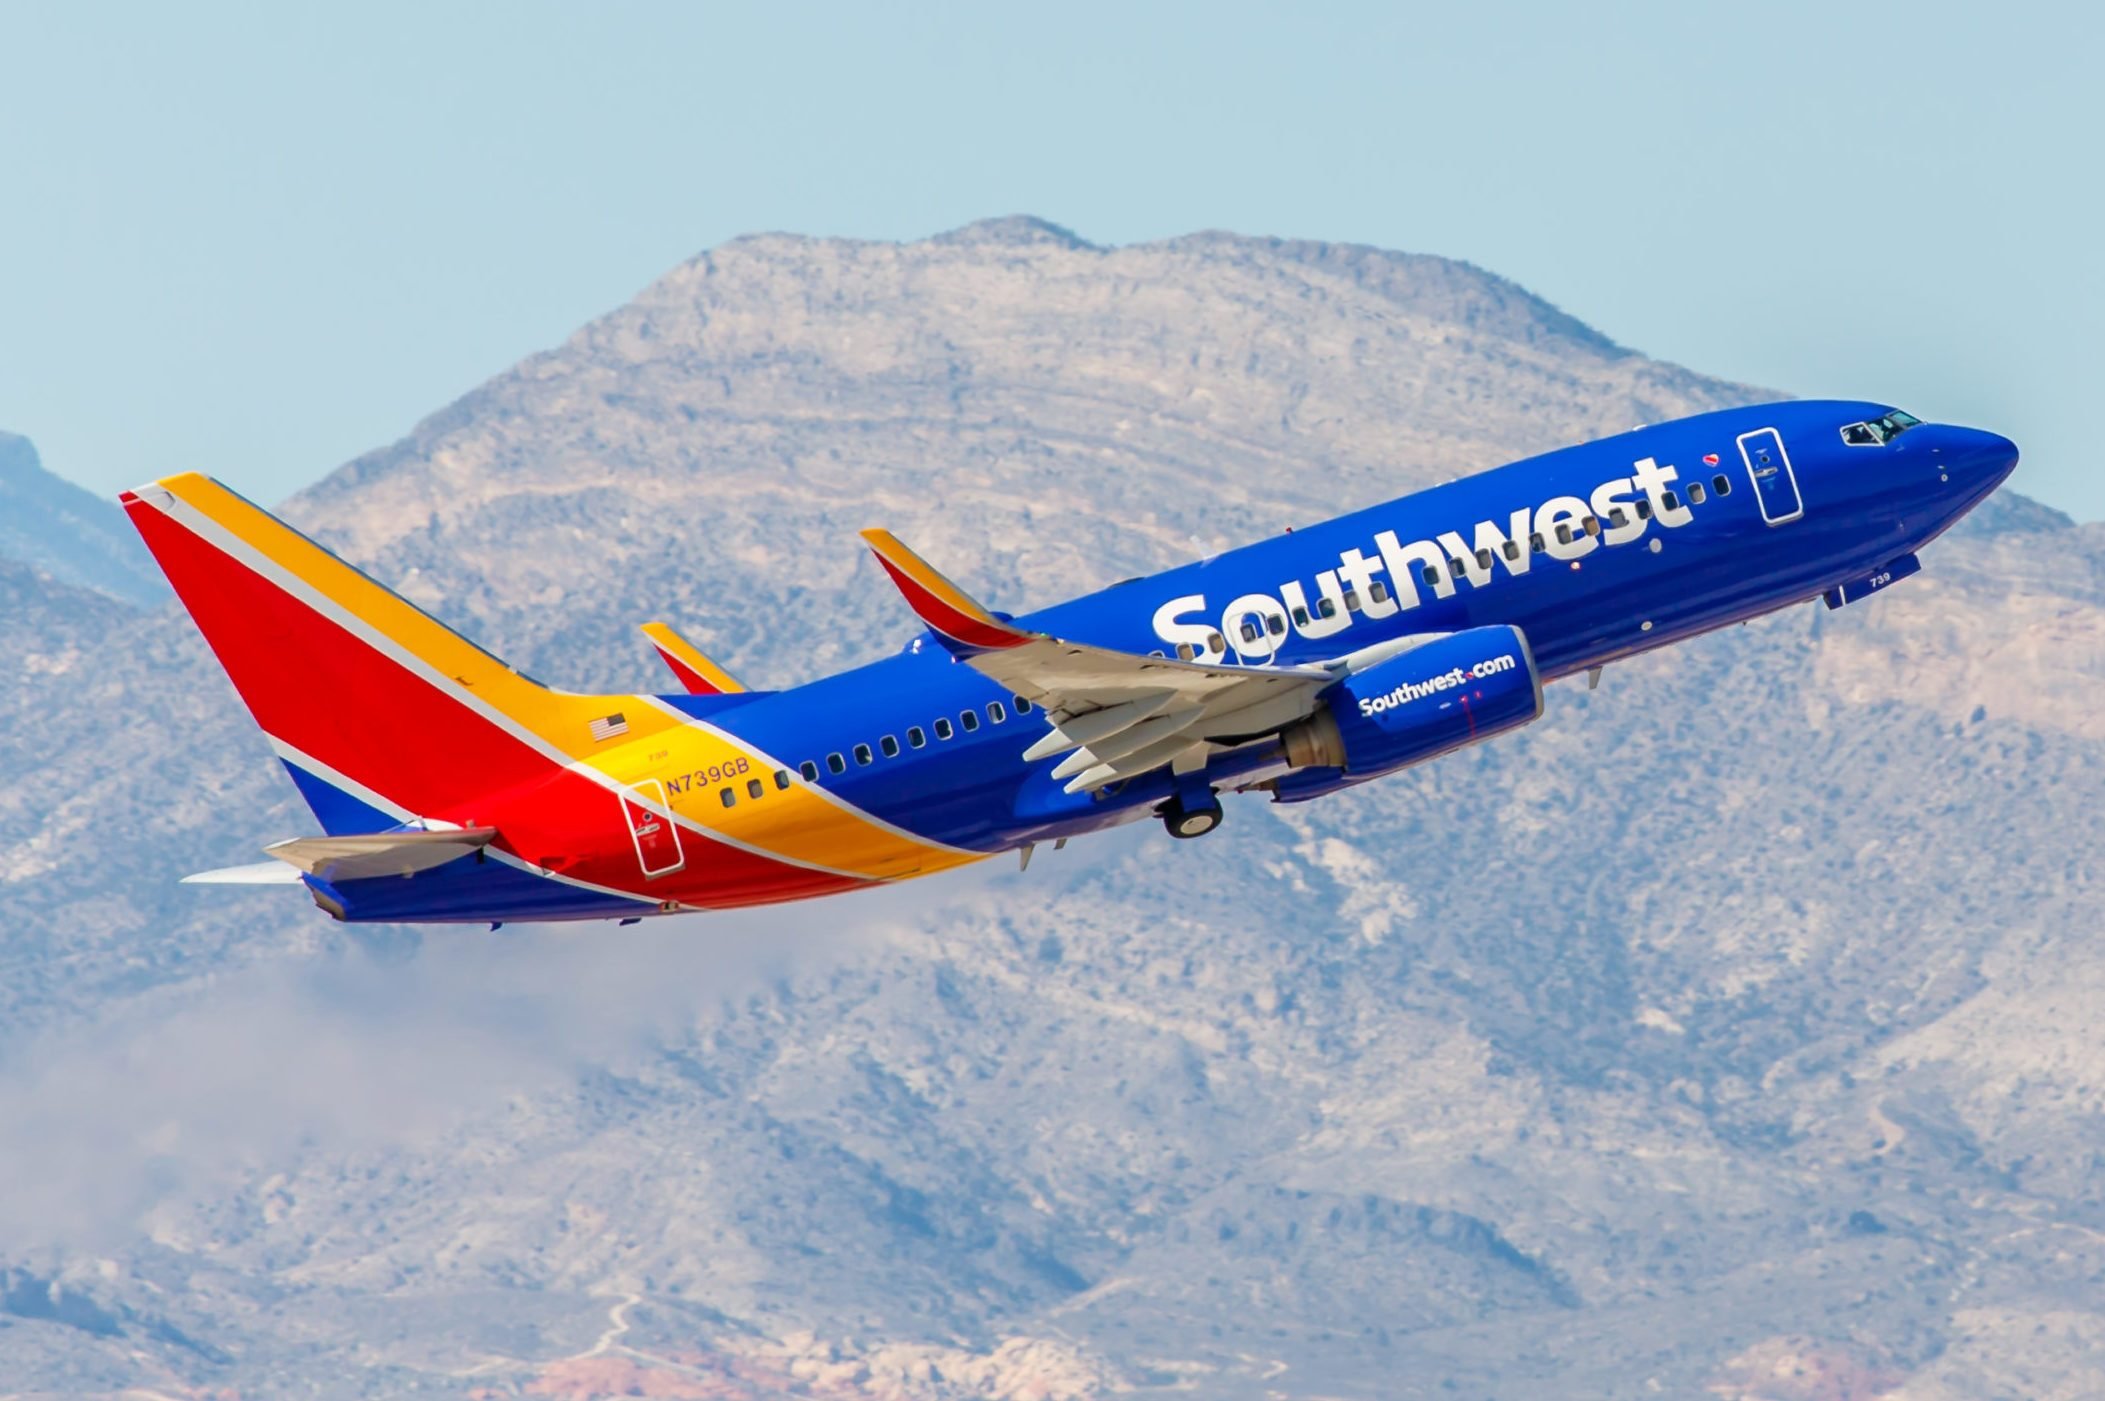 Boeing 737 Southwest Airlines takes off from McCarran International Airport